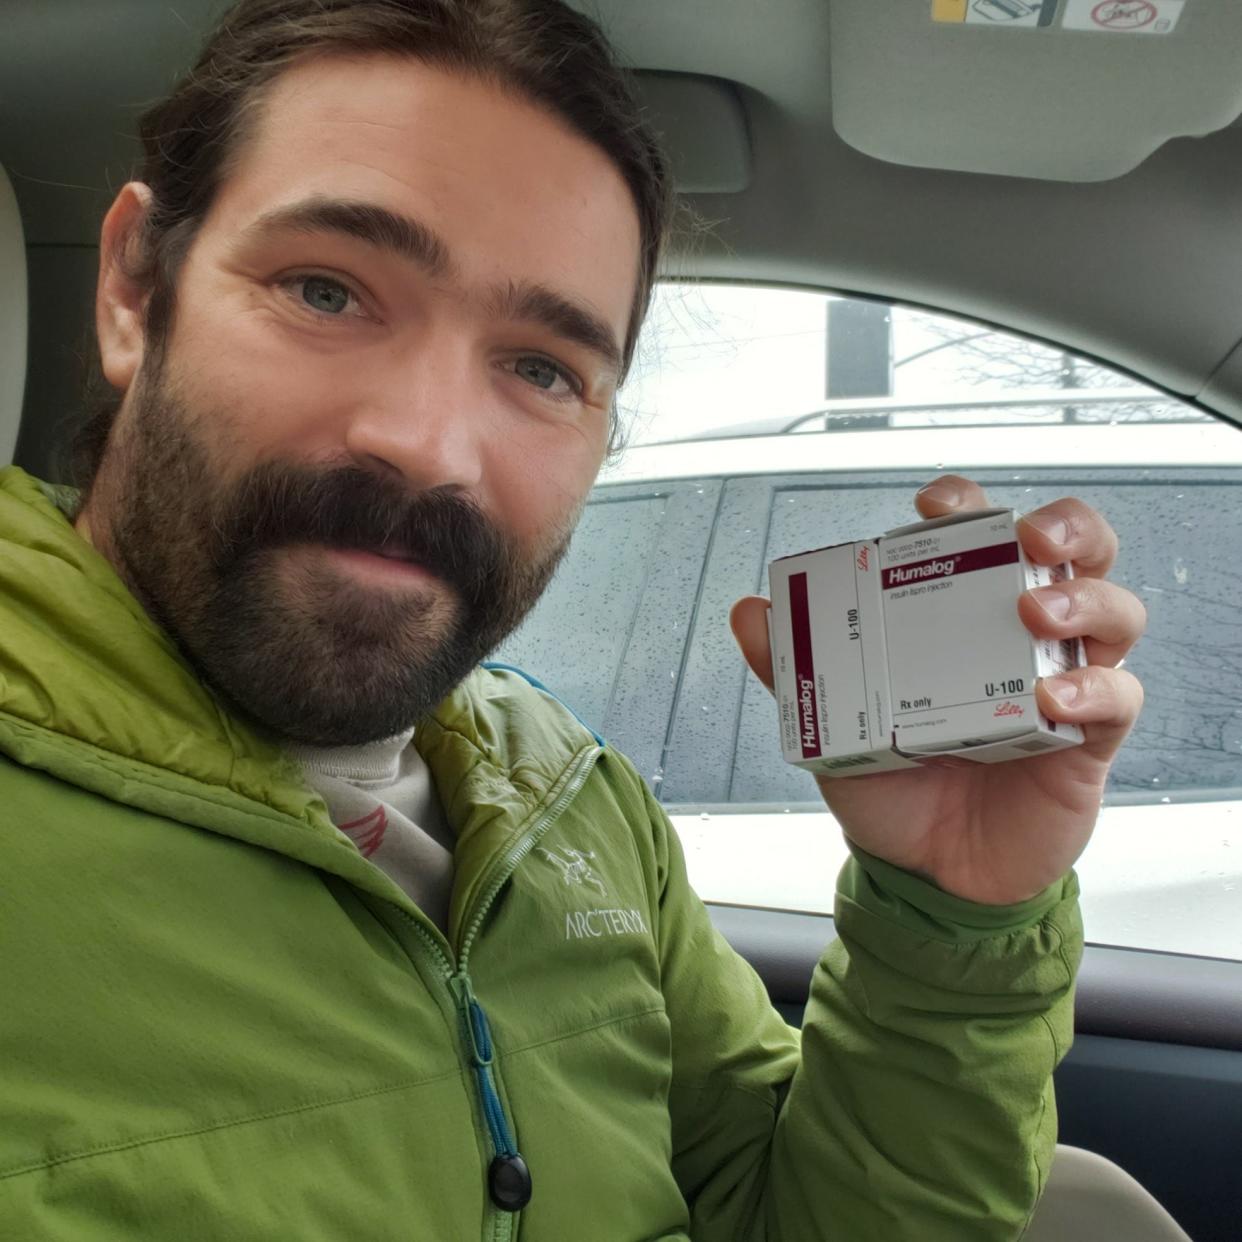 Bram Sable-Smith holds a month’s worth of insulin that took him 17 days and 20 phone calls to acquire. The health insurance he got when he switched jobs refused to cover his ongoing prescription without something called a prior authorization, essentially a requirement that a physician get approval from an insurance company before prescribing a treatment.